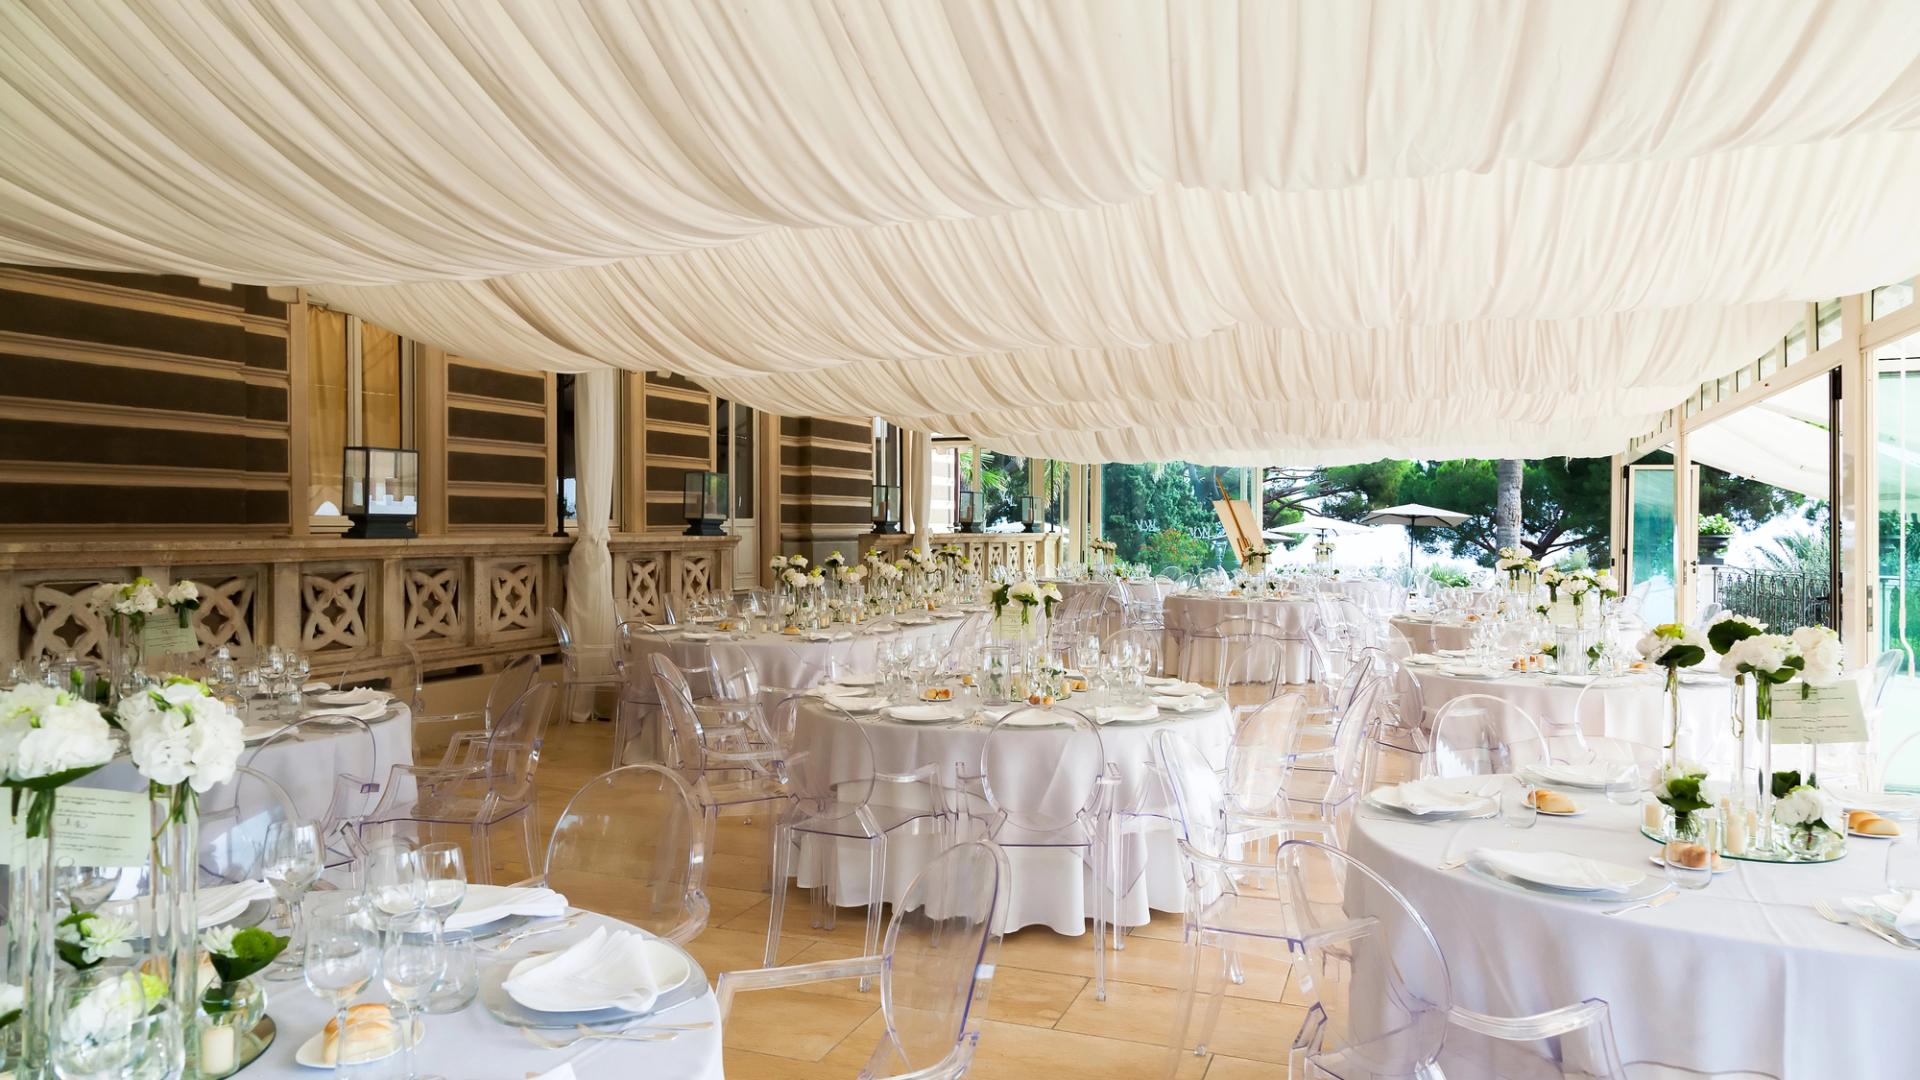 Wedding Reception Venues for Hire in Mayfair